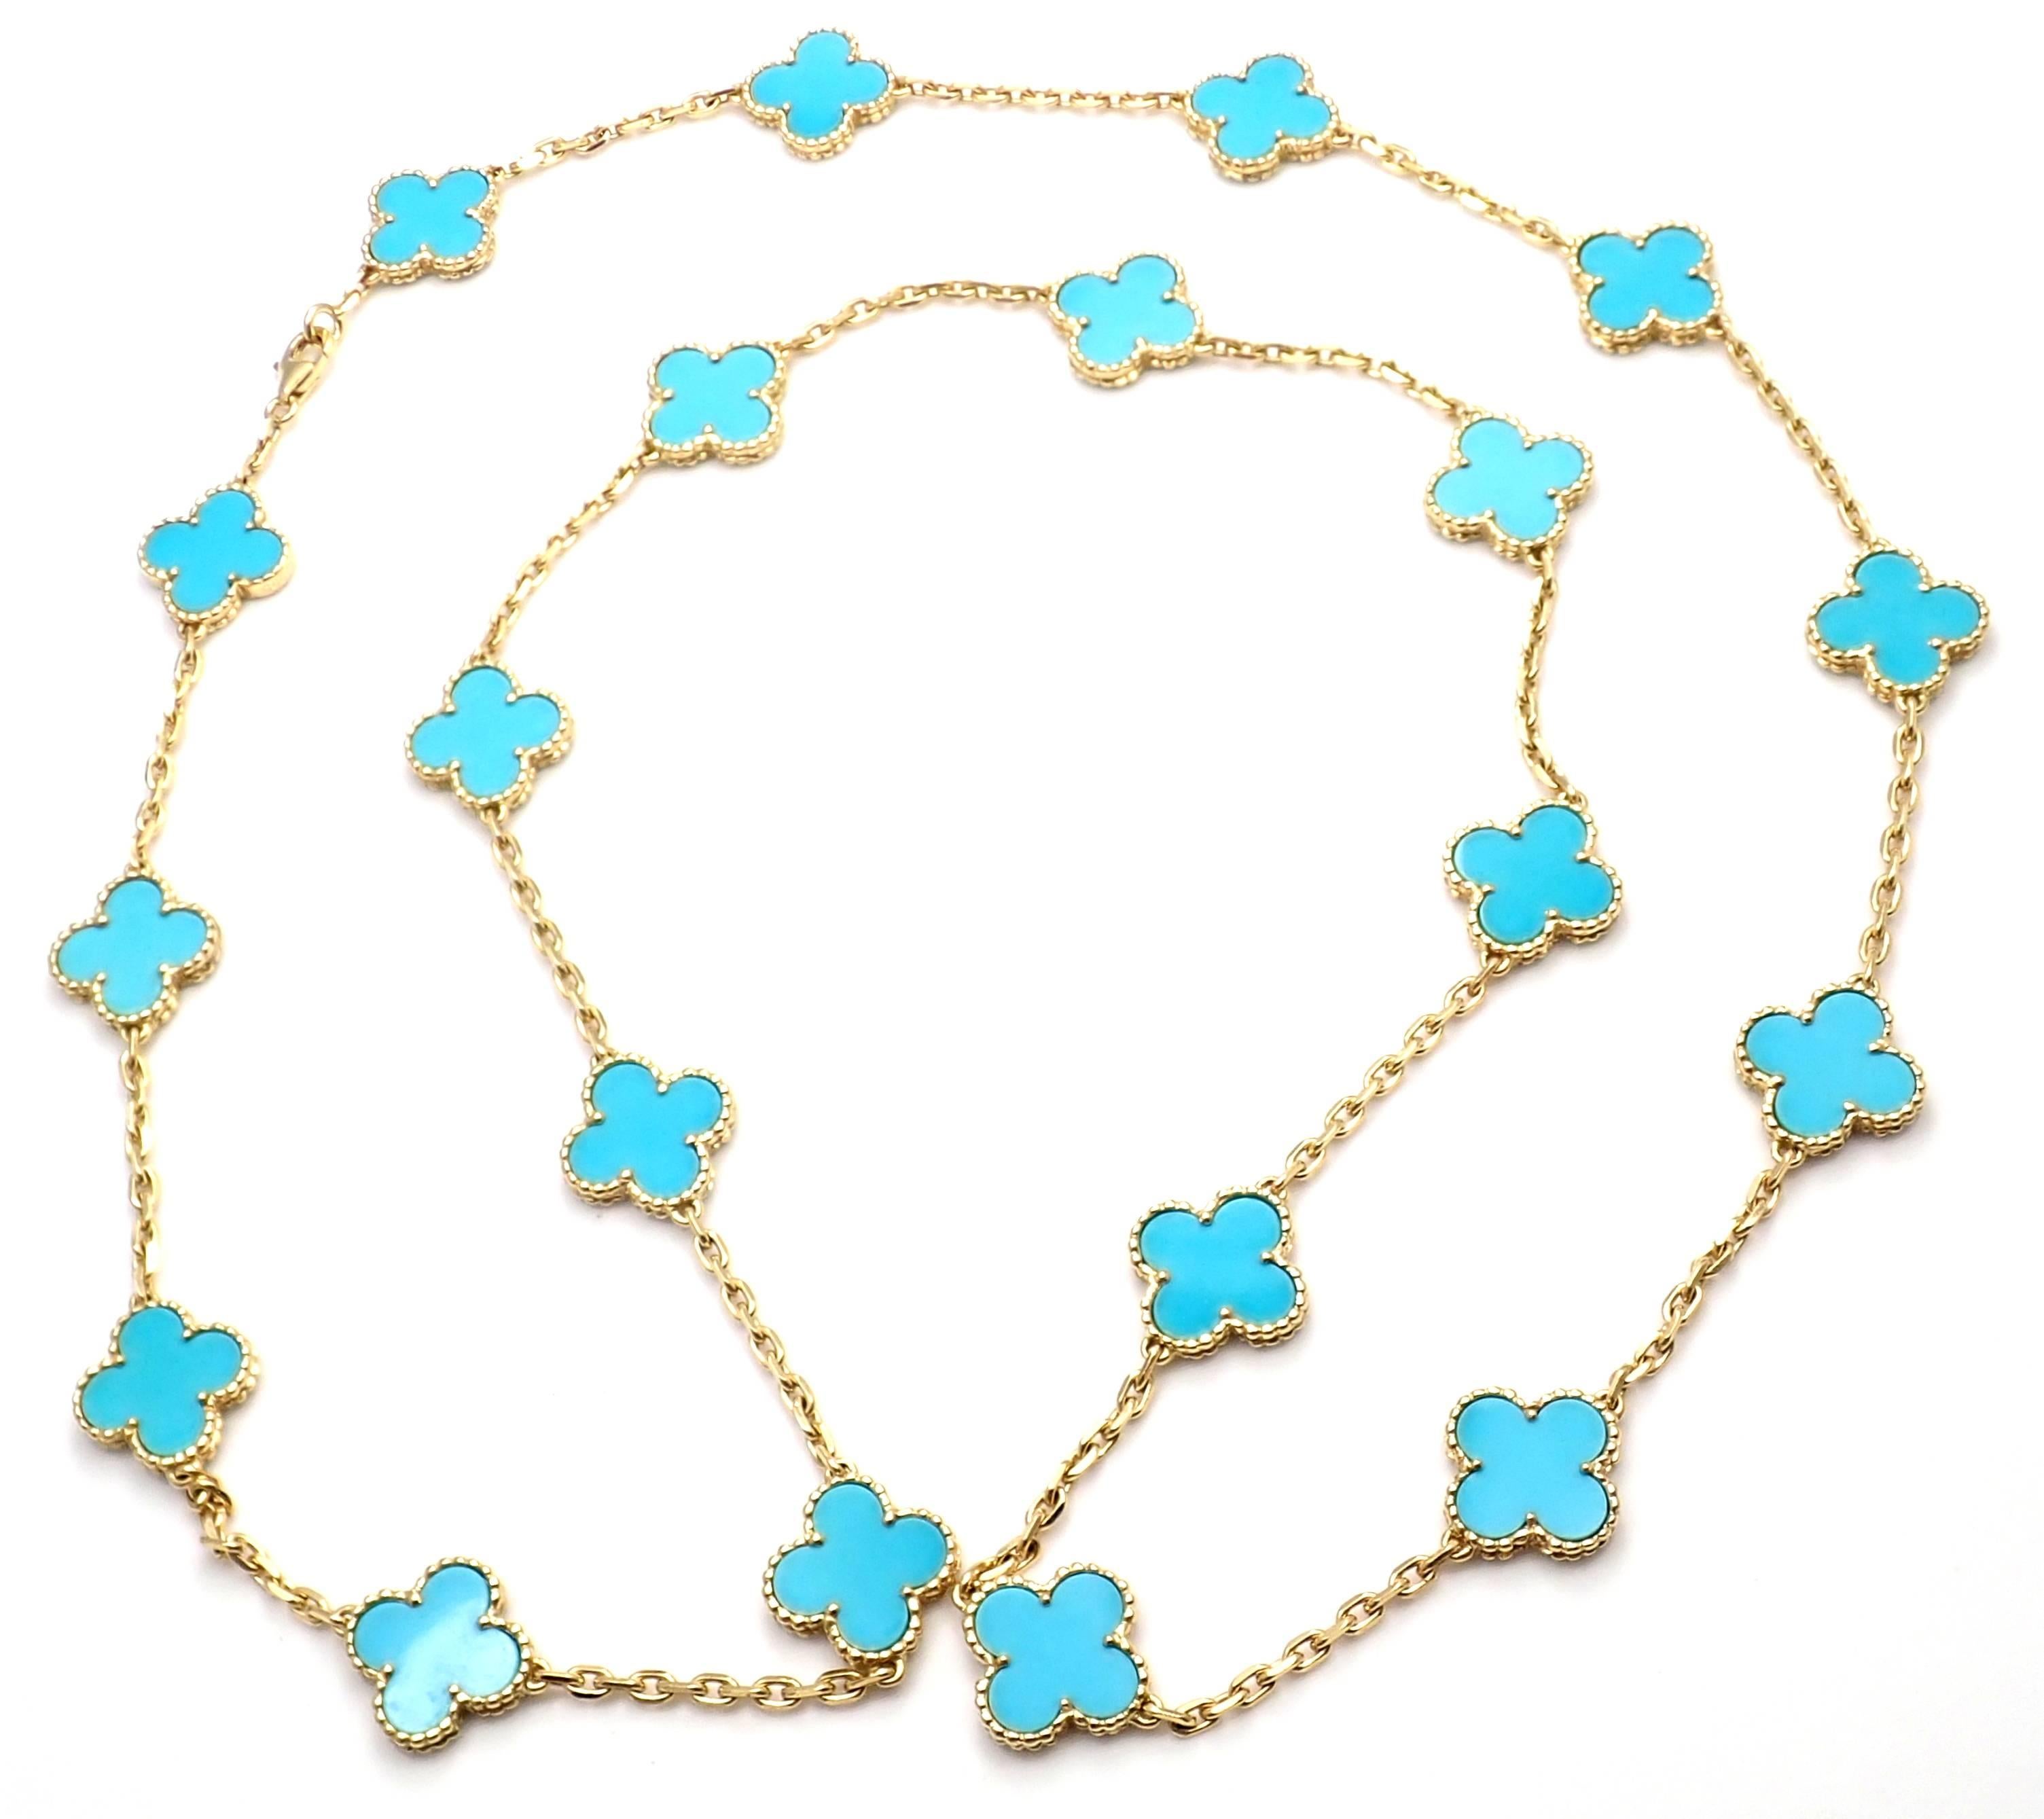 18k Yellow Gold Alhambra 20 Motifs Turquoise Necklace by Van Cleef & Arpels. 
This necklace comes with a Van Cleef & Arpels certificate from VCA store and a box.
With 20 motifs of turquoise alhambra stones 15mm each
Details: 
Length: 32.5